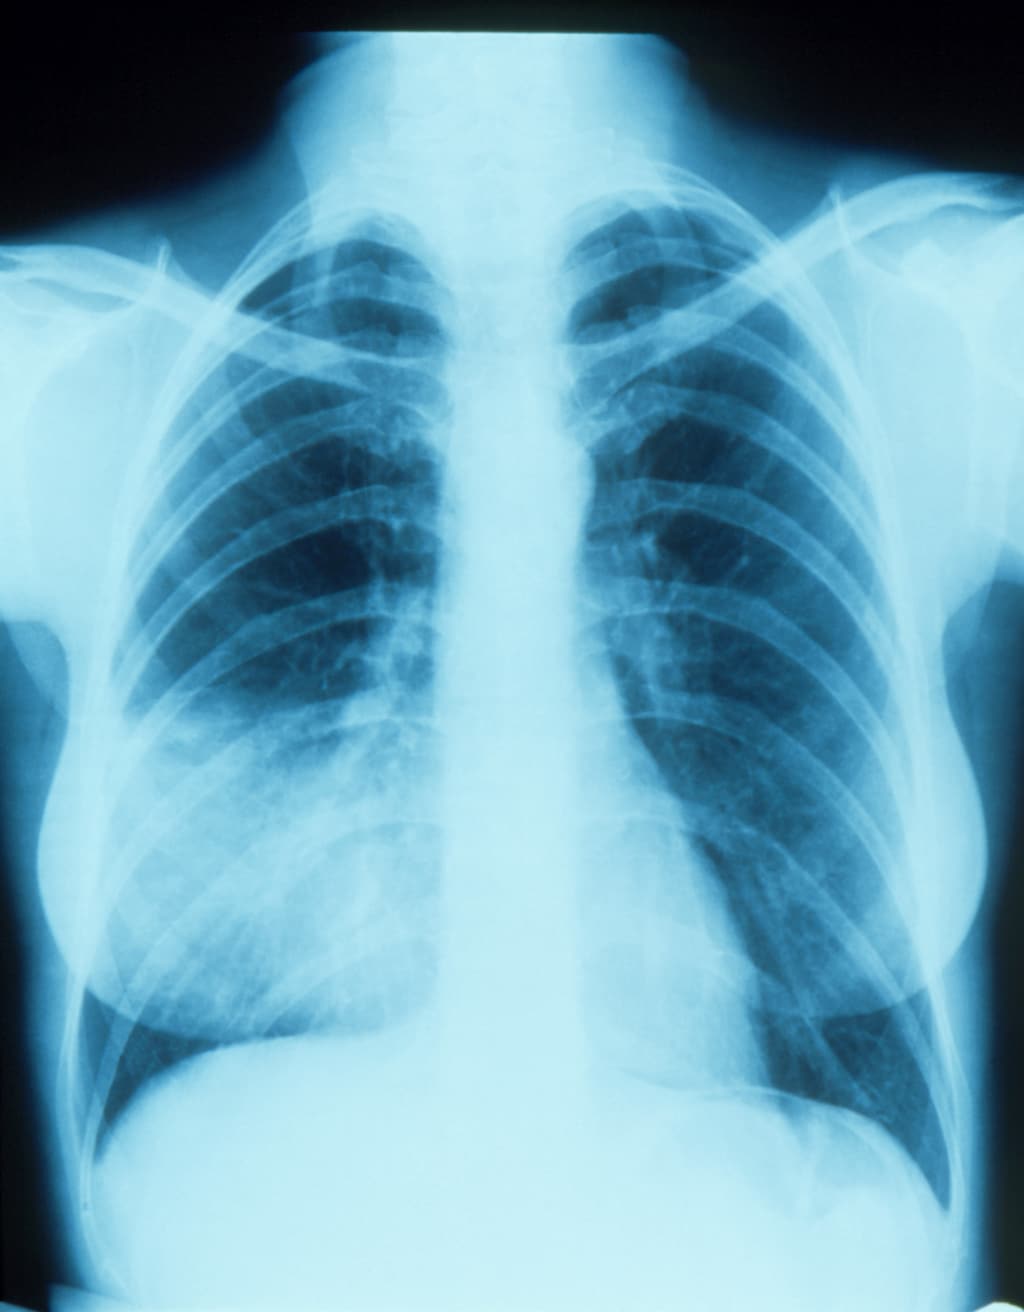 Pneumonia of the Right Middle Lobe With Silhouette Sign